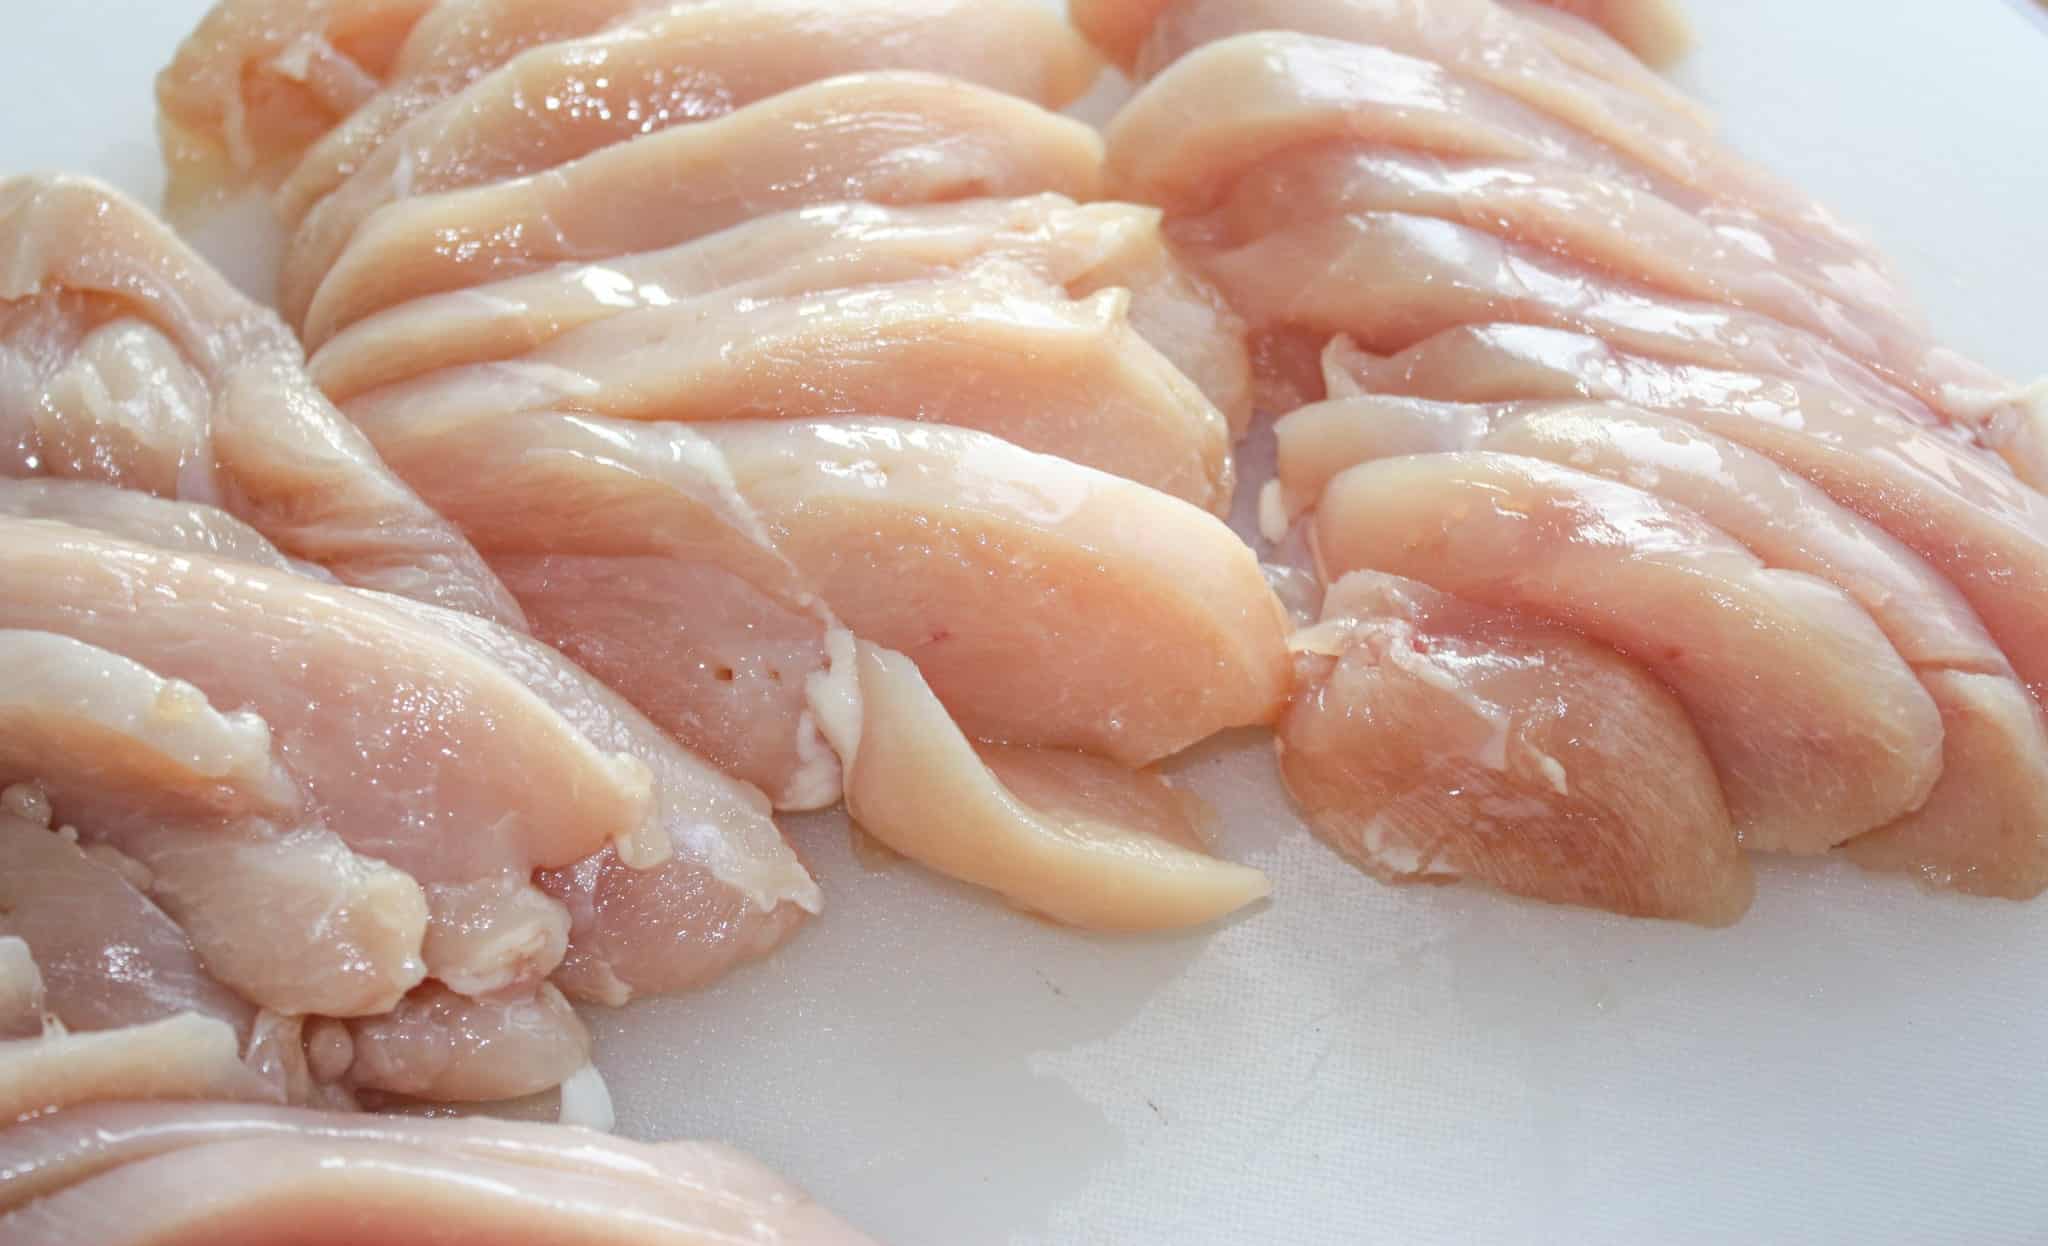 The chicken breasts.